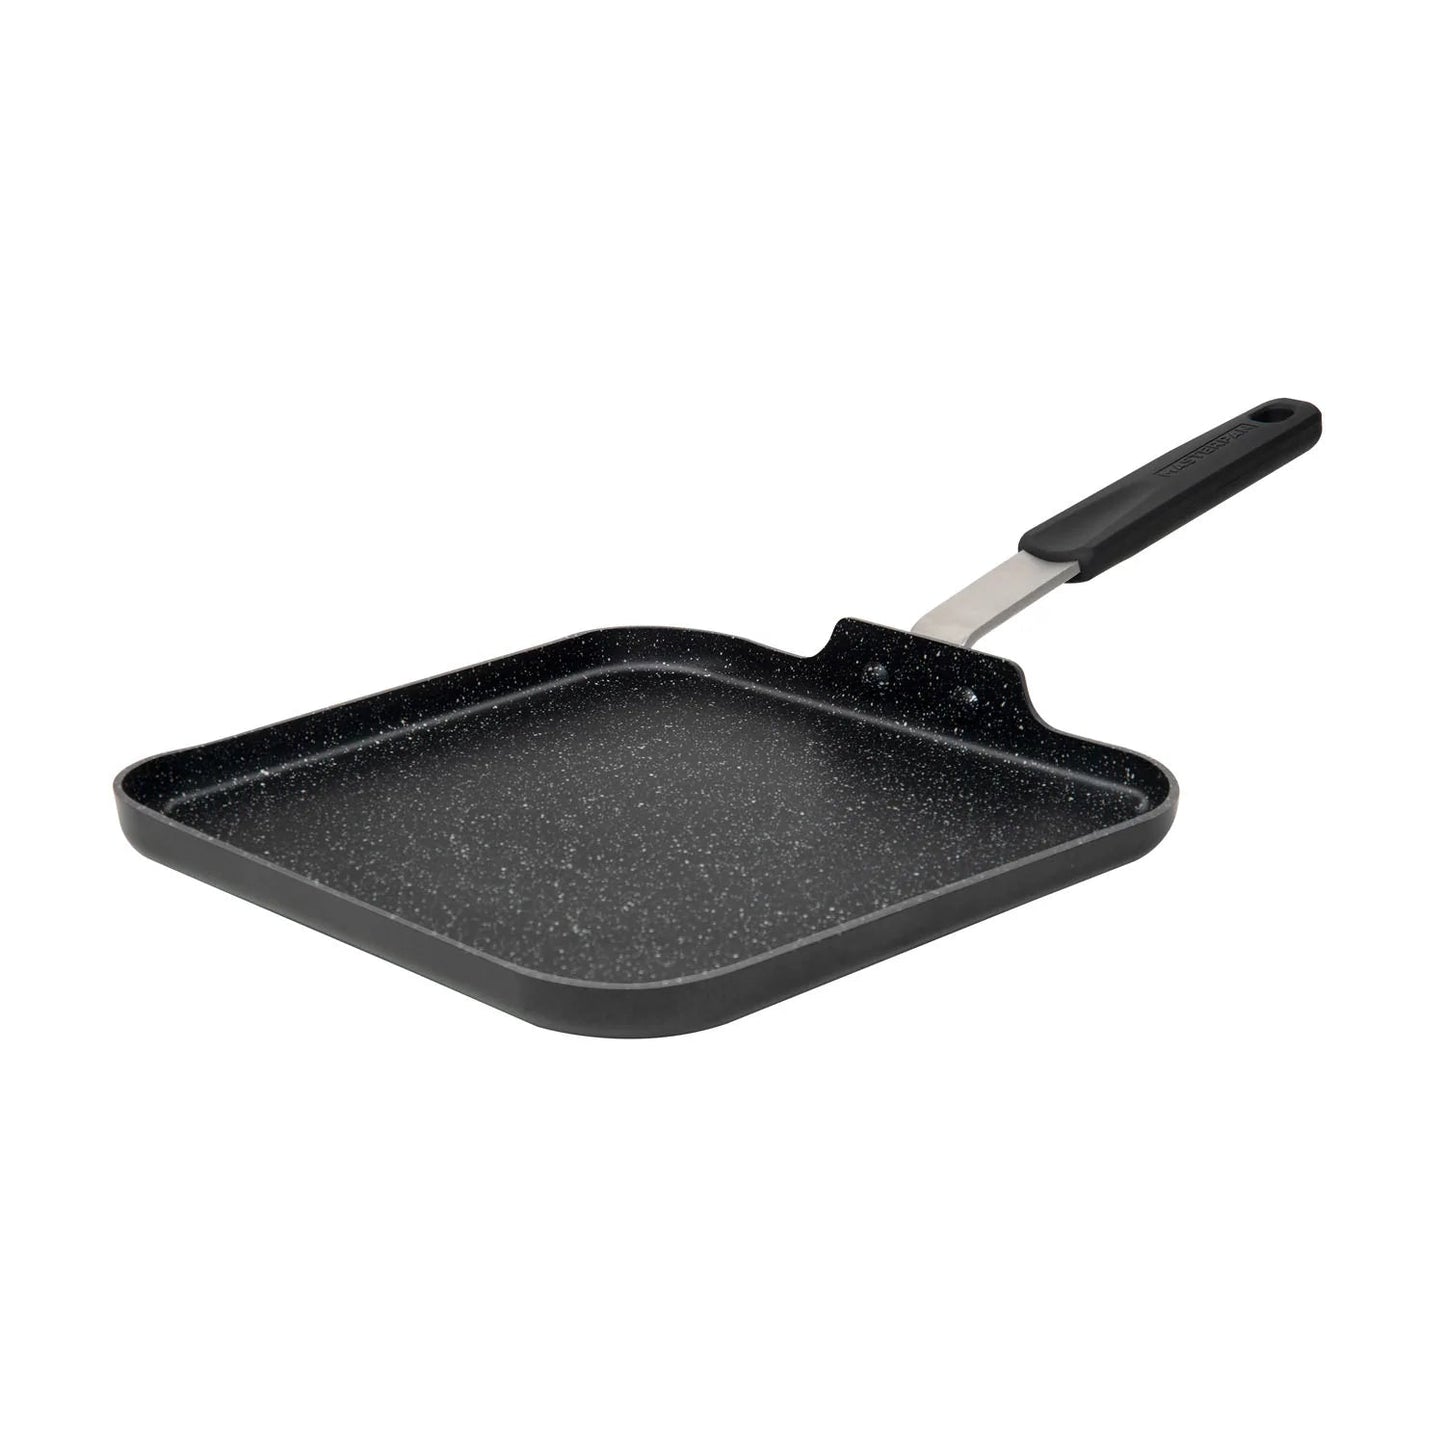 MASTERPAN Chef's Series 11” Griddle Pan / Pancake Pan, Non-stick Aluminum Cookware With Stainless Steel Chef’s Handle